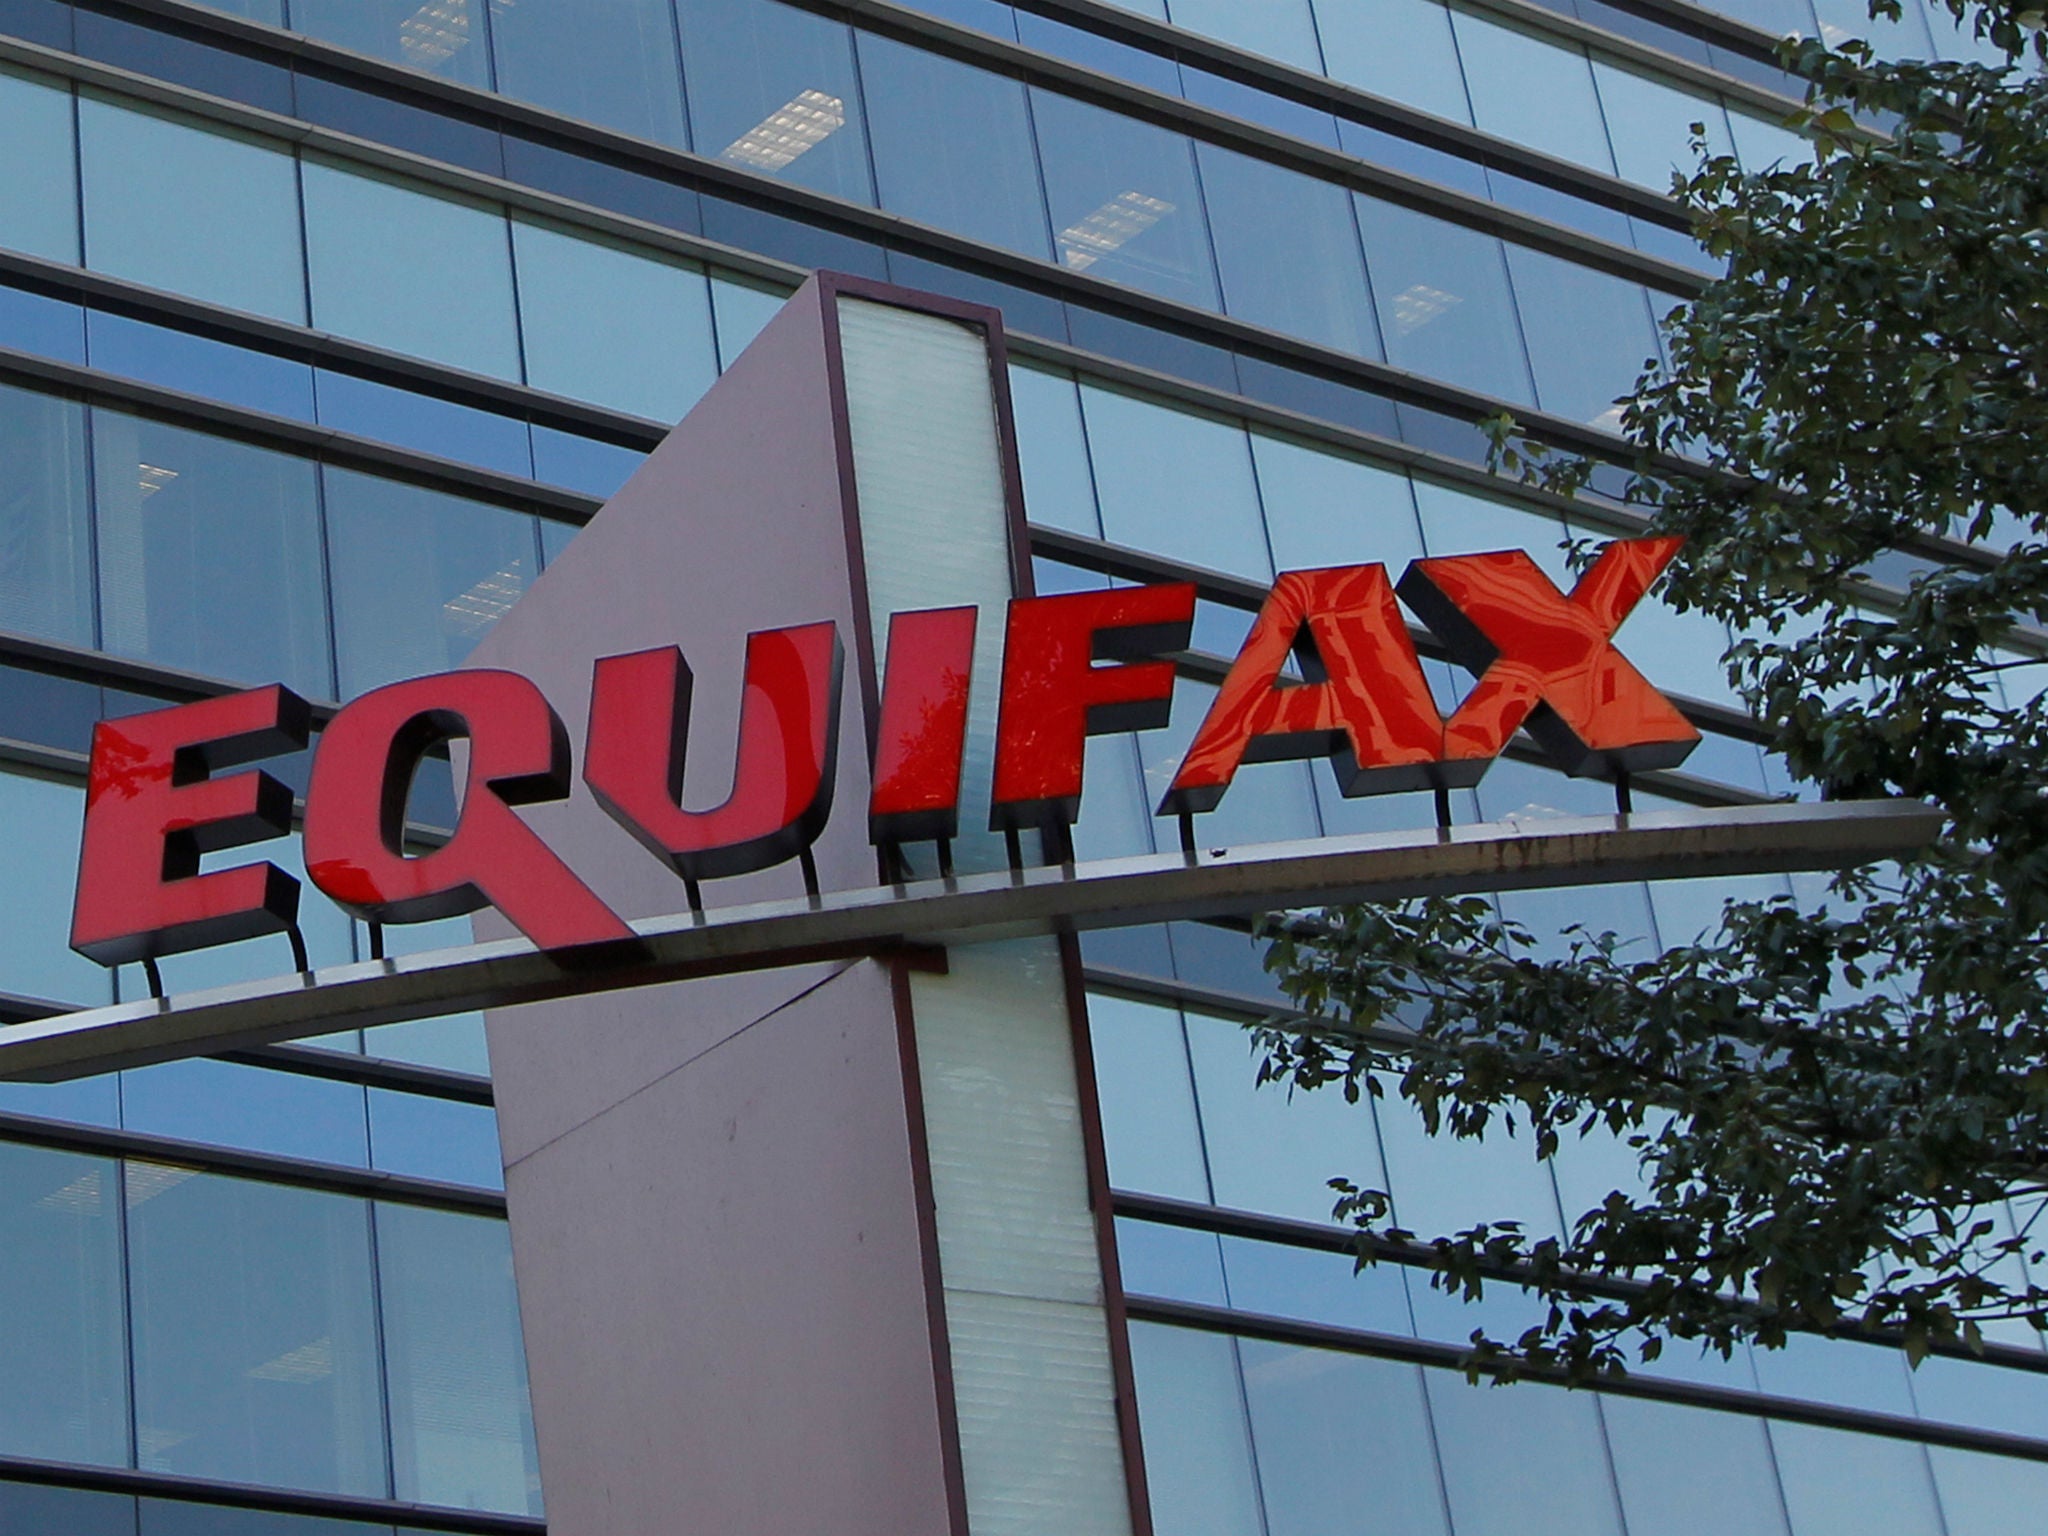 Equifax's corporate offices are pictured in Atlanta, Georgia